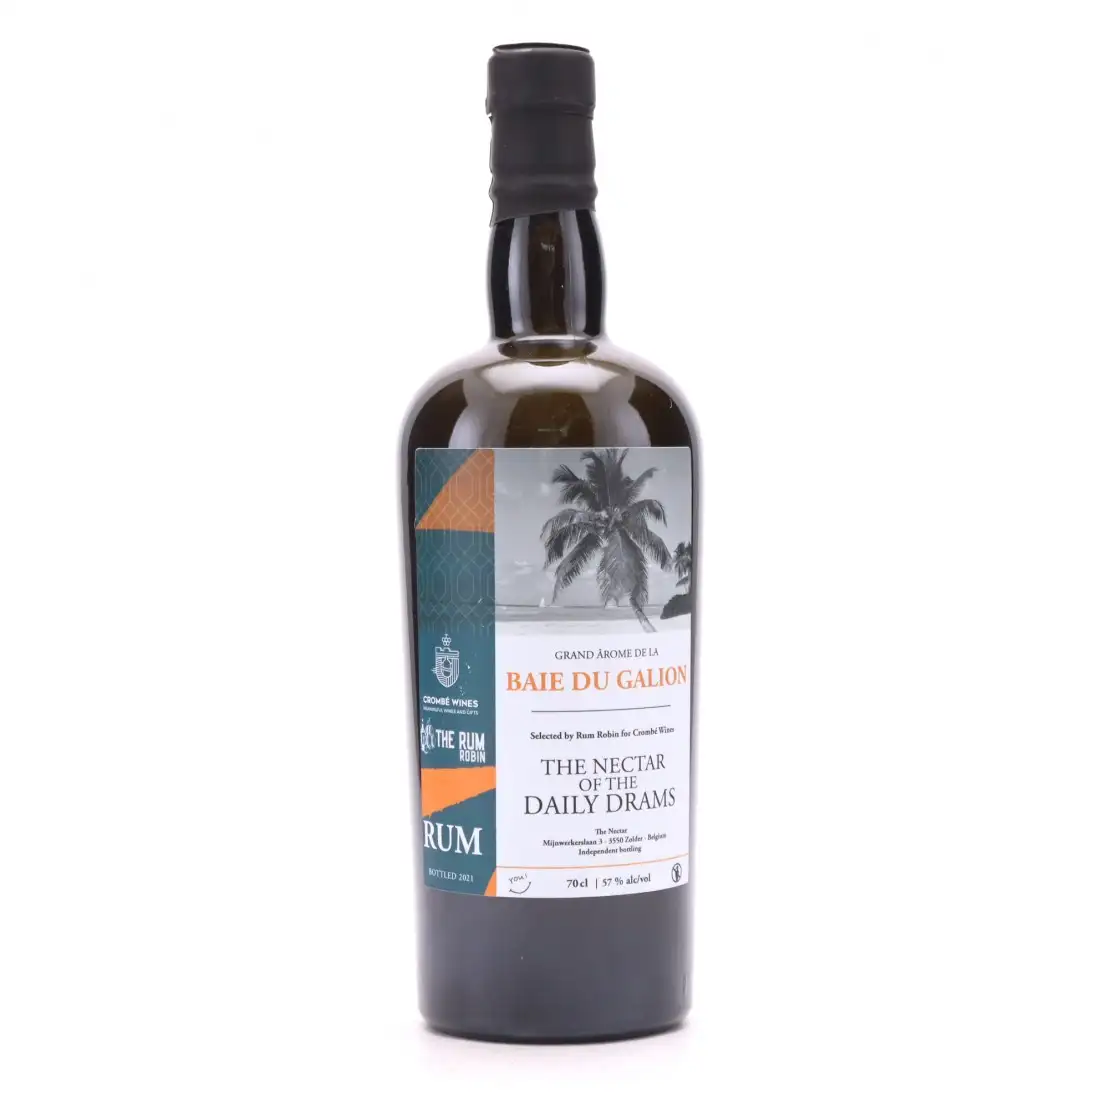 Image of the front of the bottle of the rum The Nectar Of The Daily Drams Baie du Galion